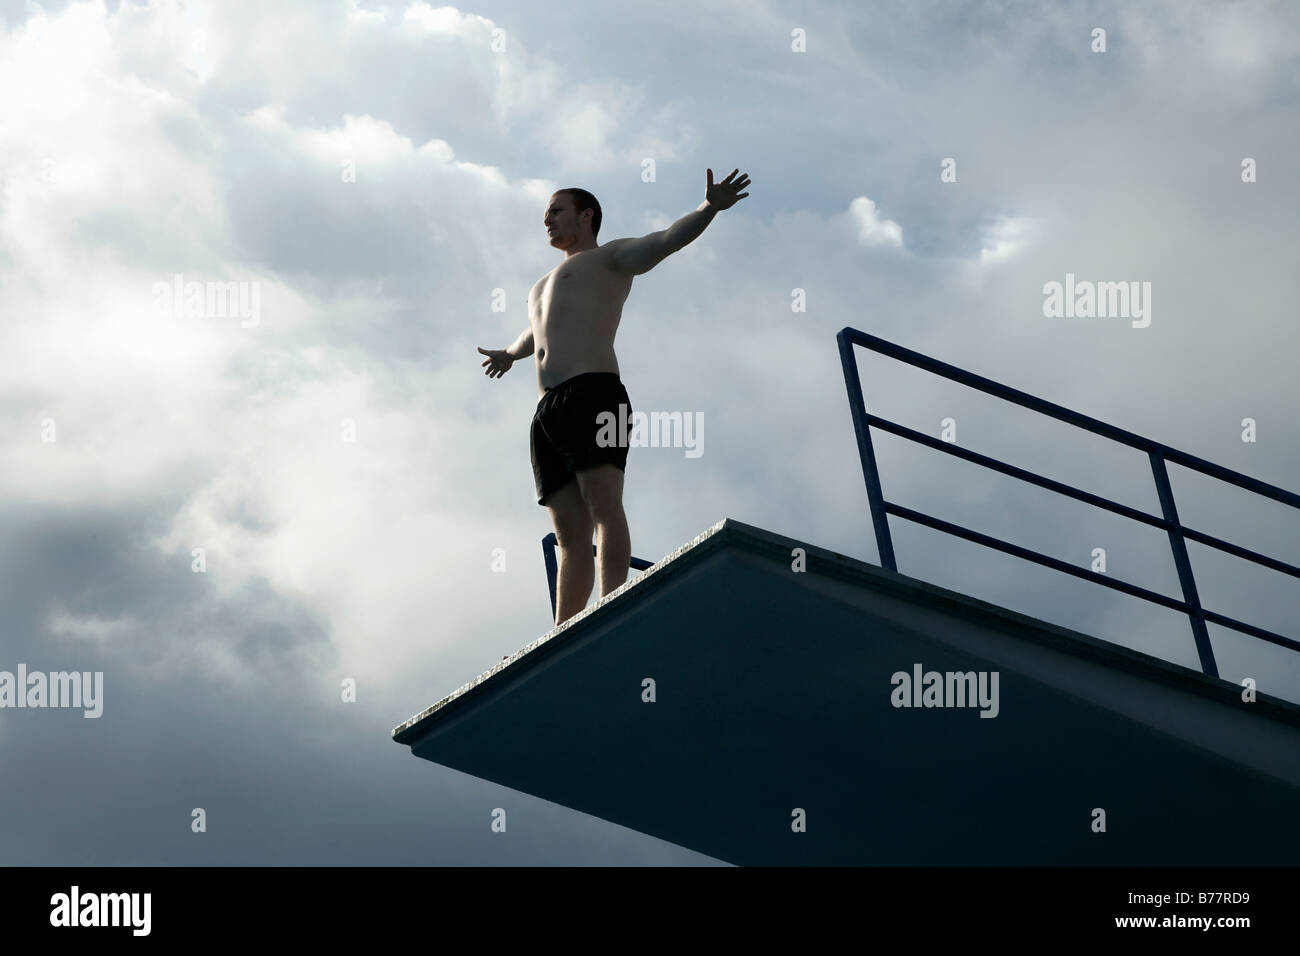 Young man standing on a diving tower Stock Photo